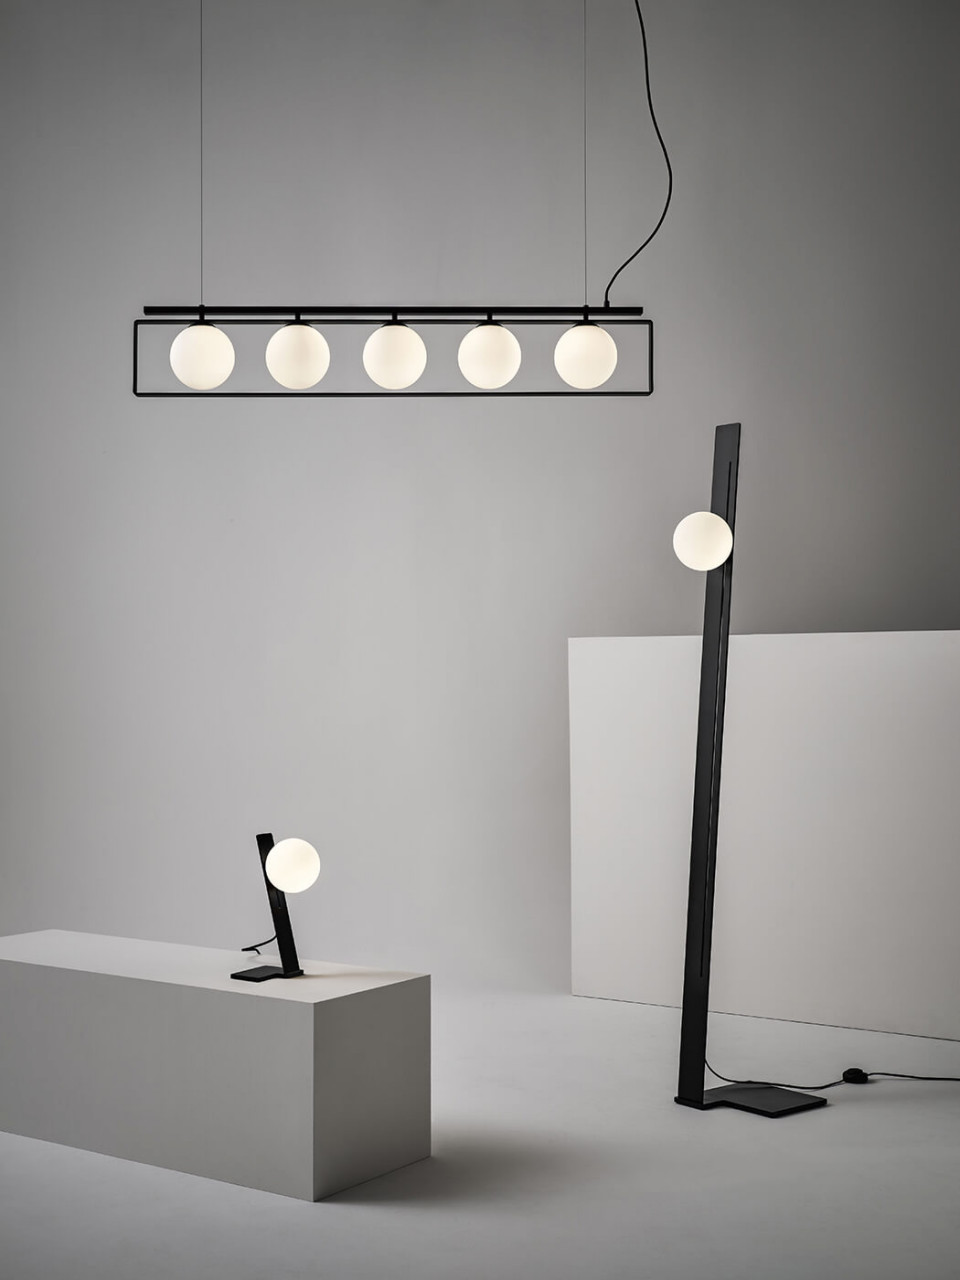 Suspense lamp collection by MIDJ